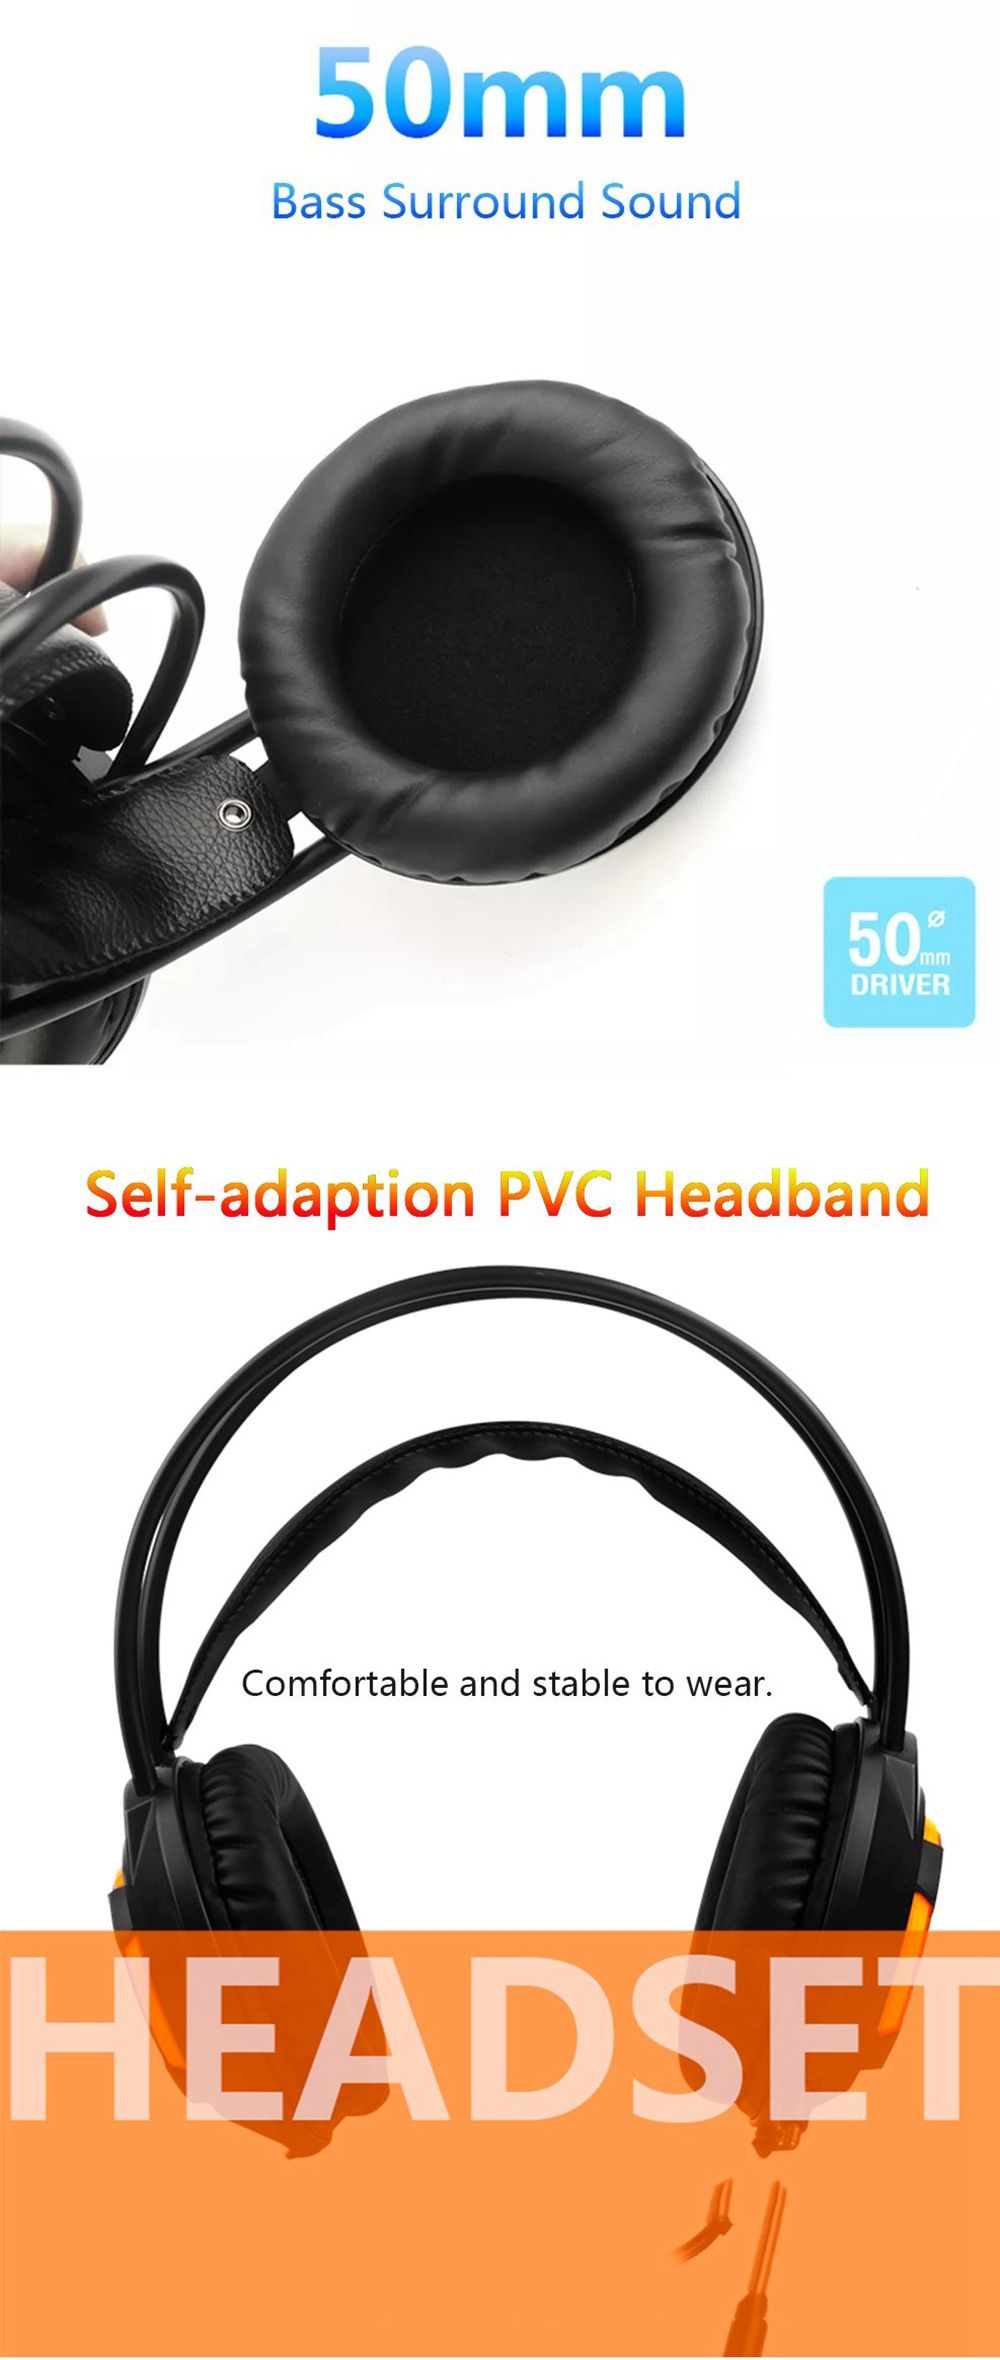 AJAZZ-AX120-Game-Headset-71mm--USB-interface-Bass-Gaming-Stereo-Headphones-Earphone-with-Microphone--1689258